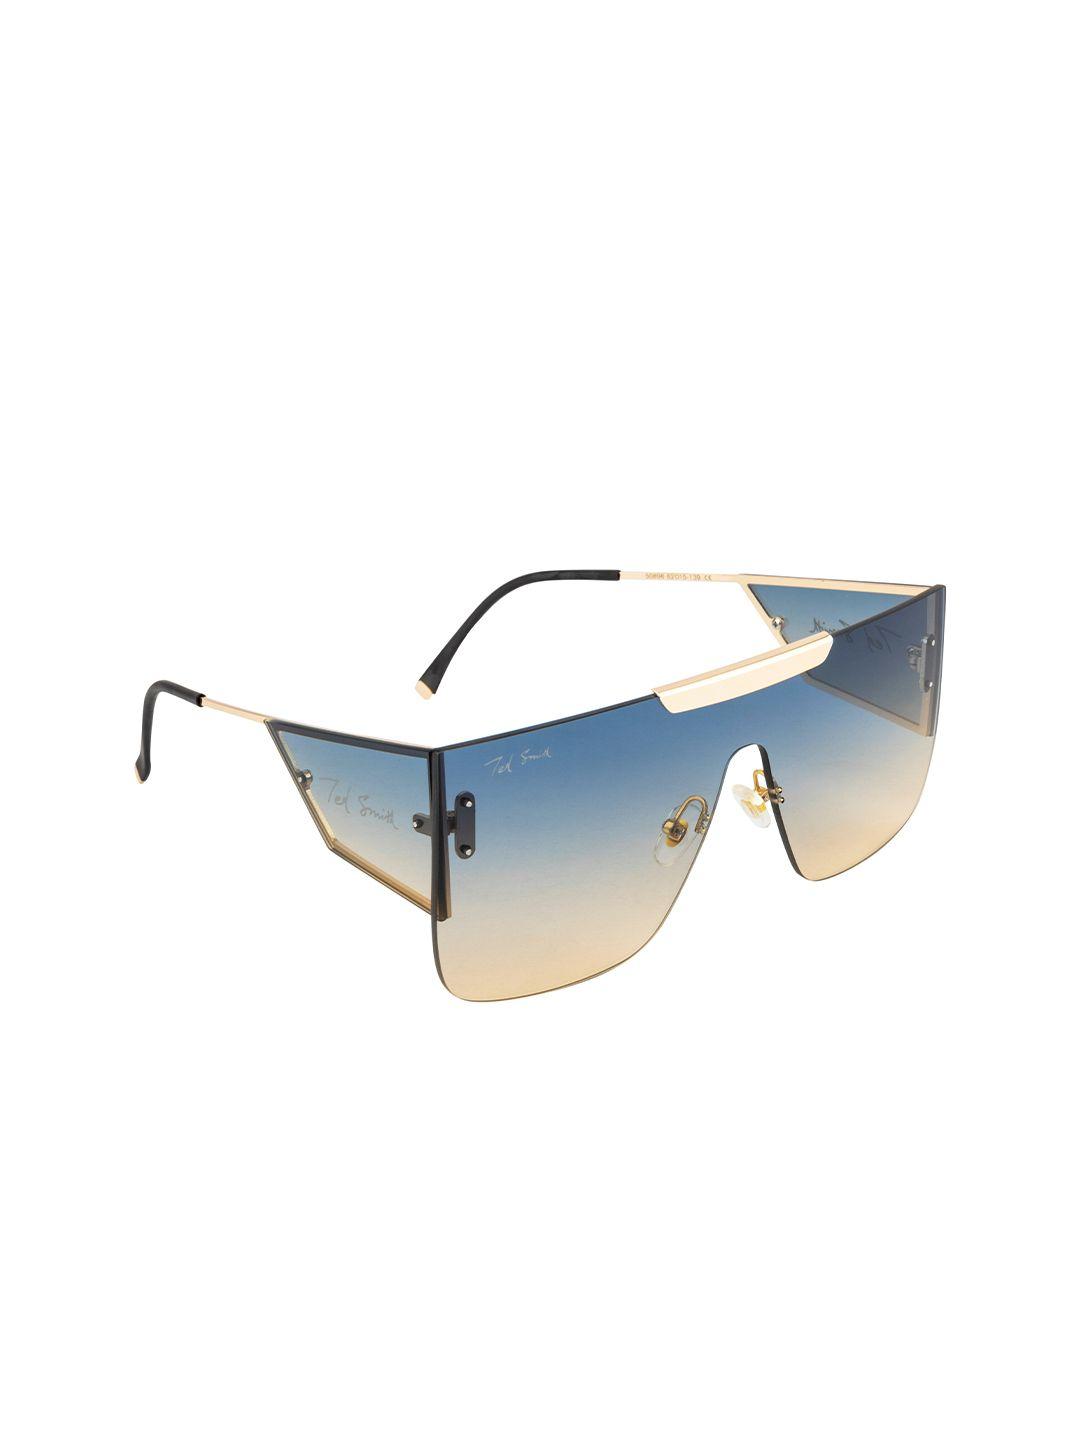 ted smith unisex blue lens & gold-toned shield sunglasses with uv protected lens